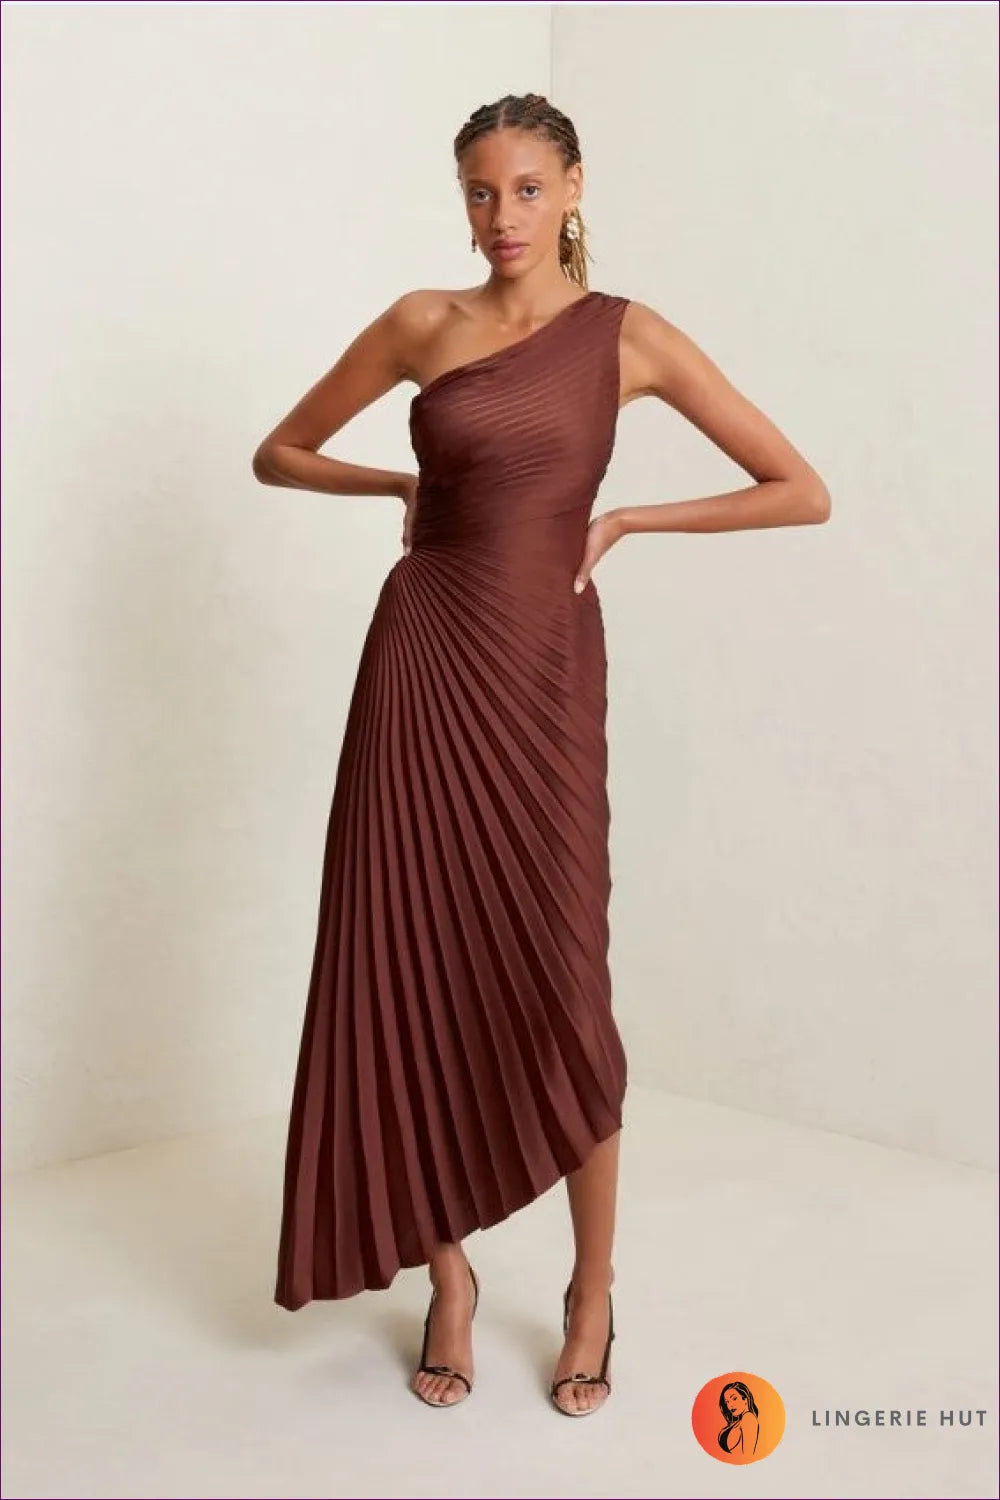 Grace The Occasion With This Elegant One-shoulder High-low Dress. The Asymmetric Satin Design Exudes